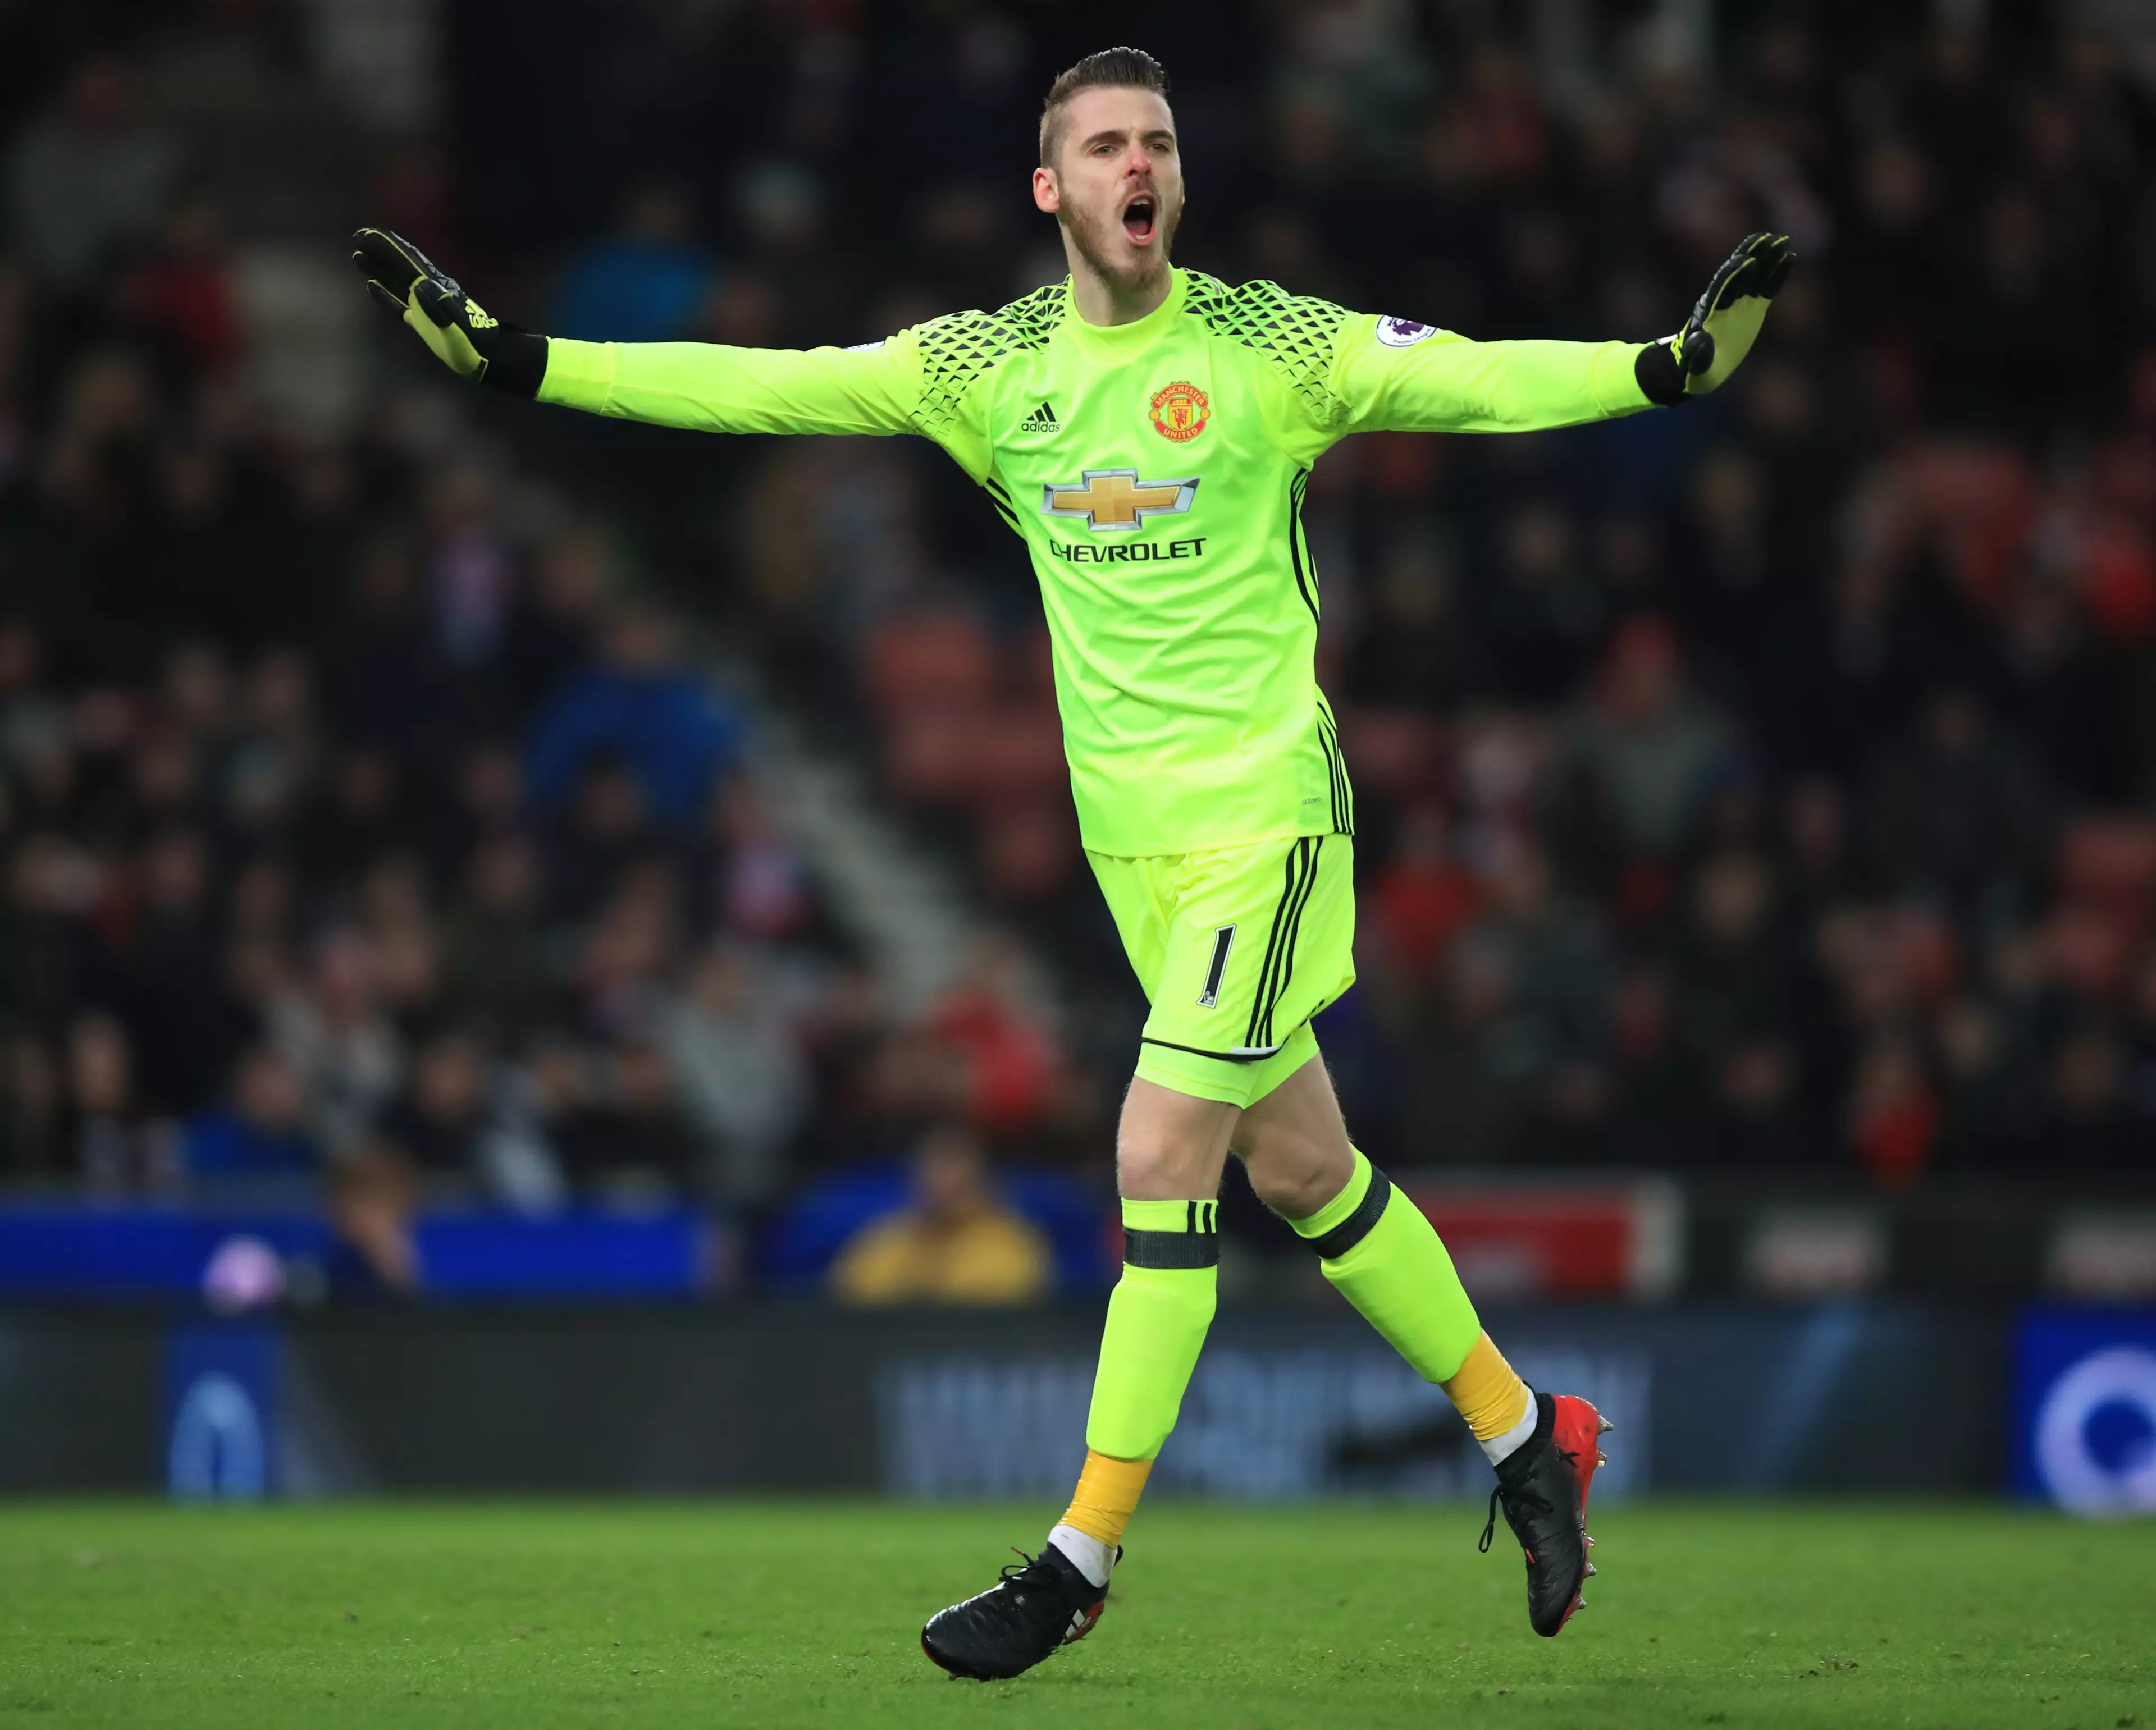 De Gea is almost irreplaceable at United. Image: PA Images